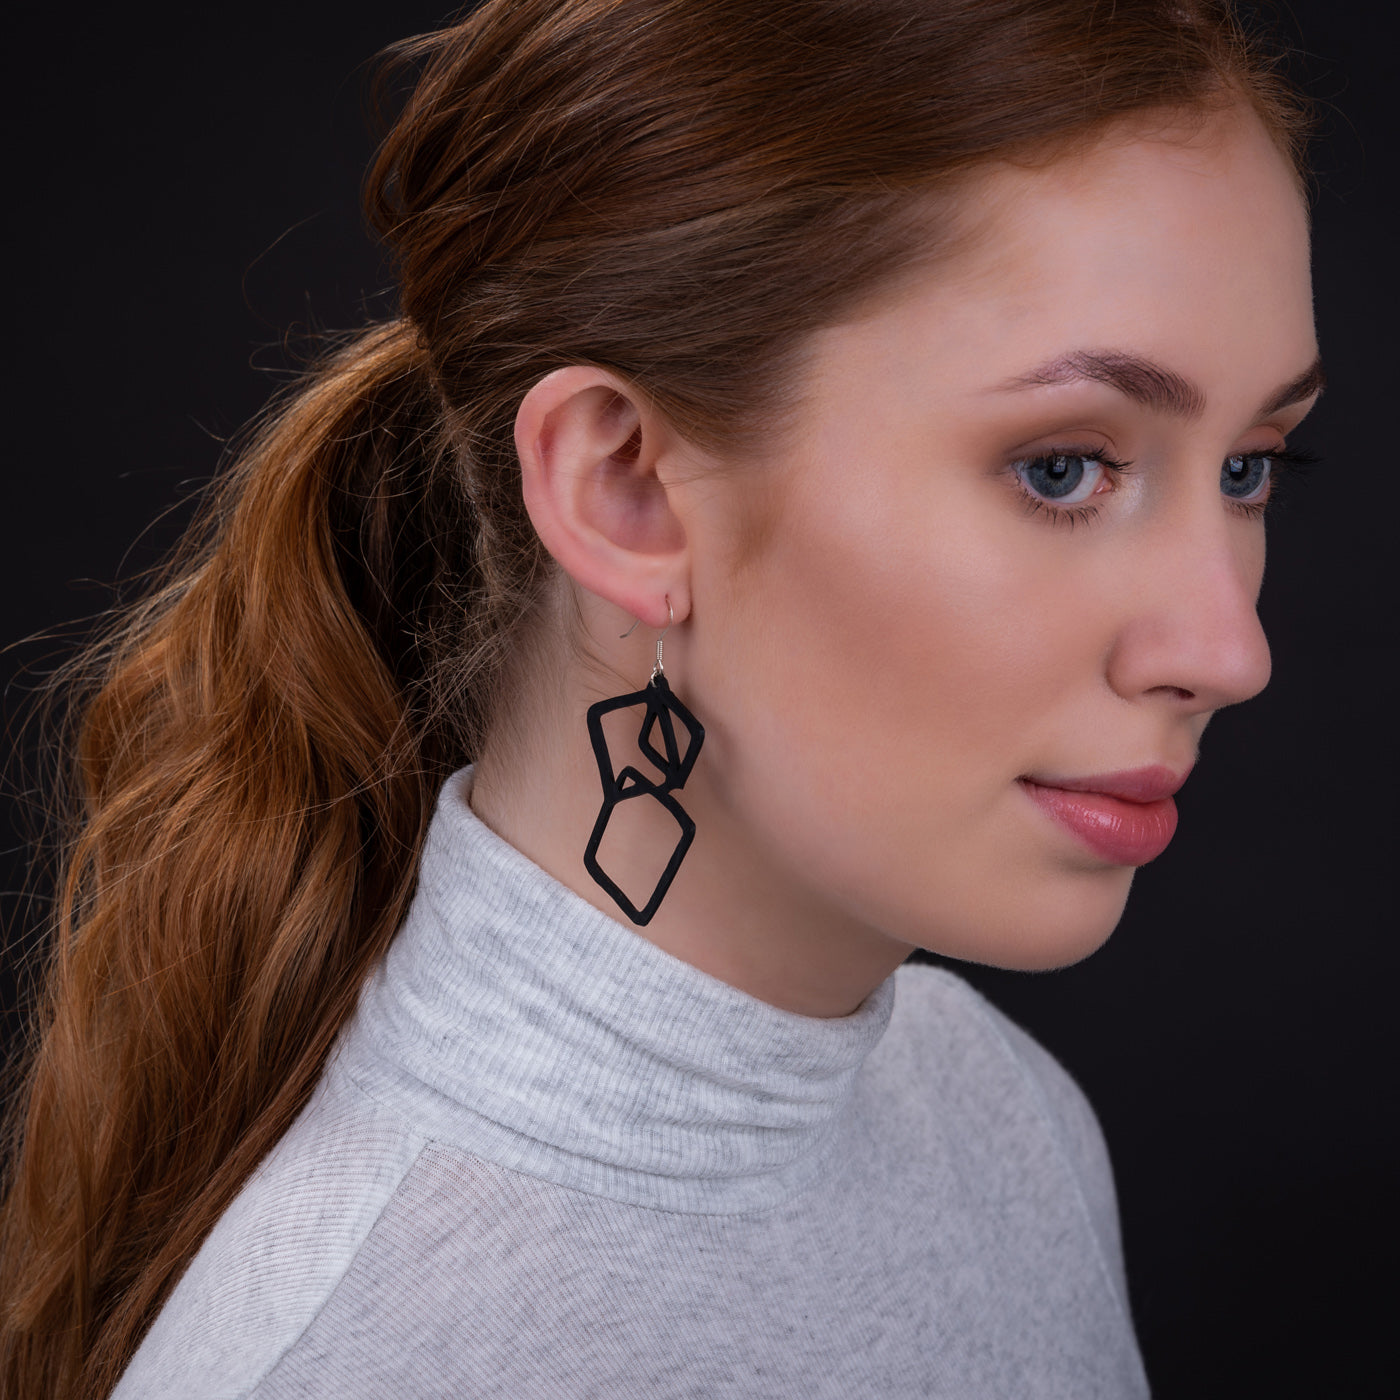 Belinda Geometric Recycled Rubber Earrings by Paguro Upcycle